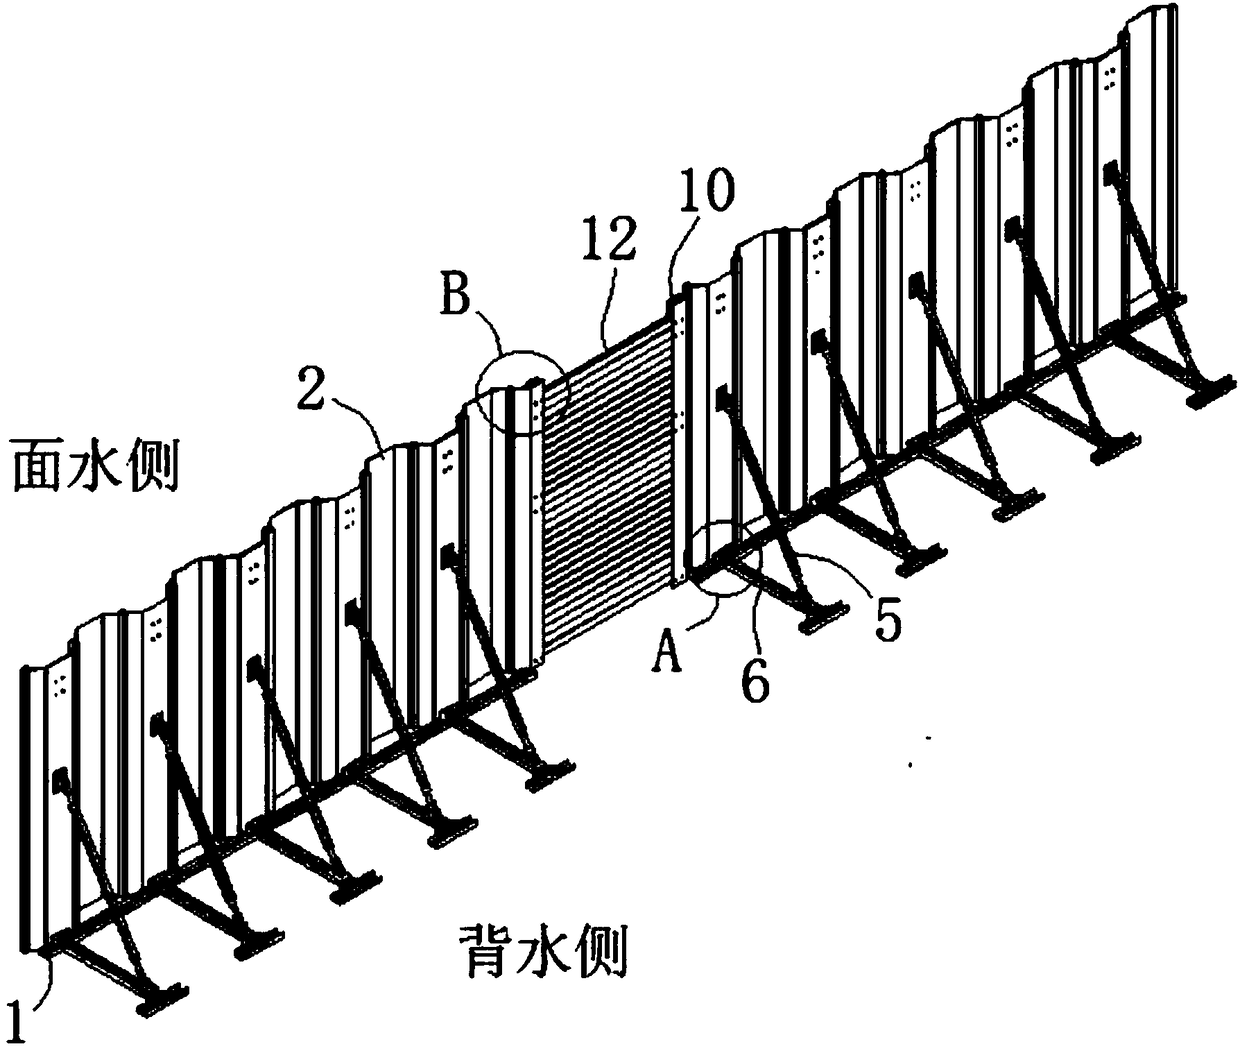 Structure and Construction Method of Retaining Wall on Hard Foundation